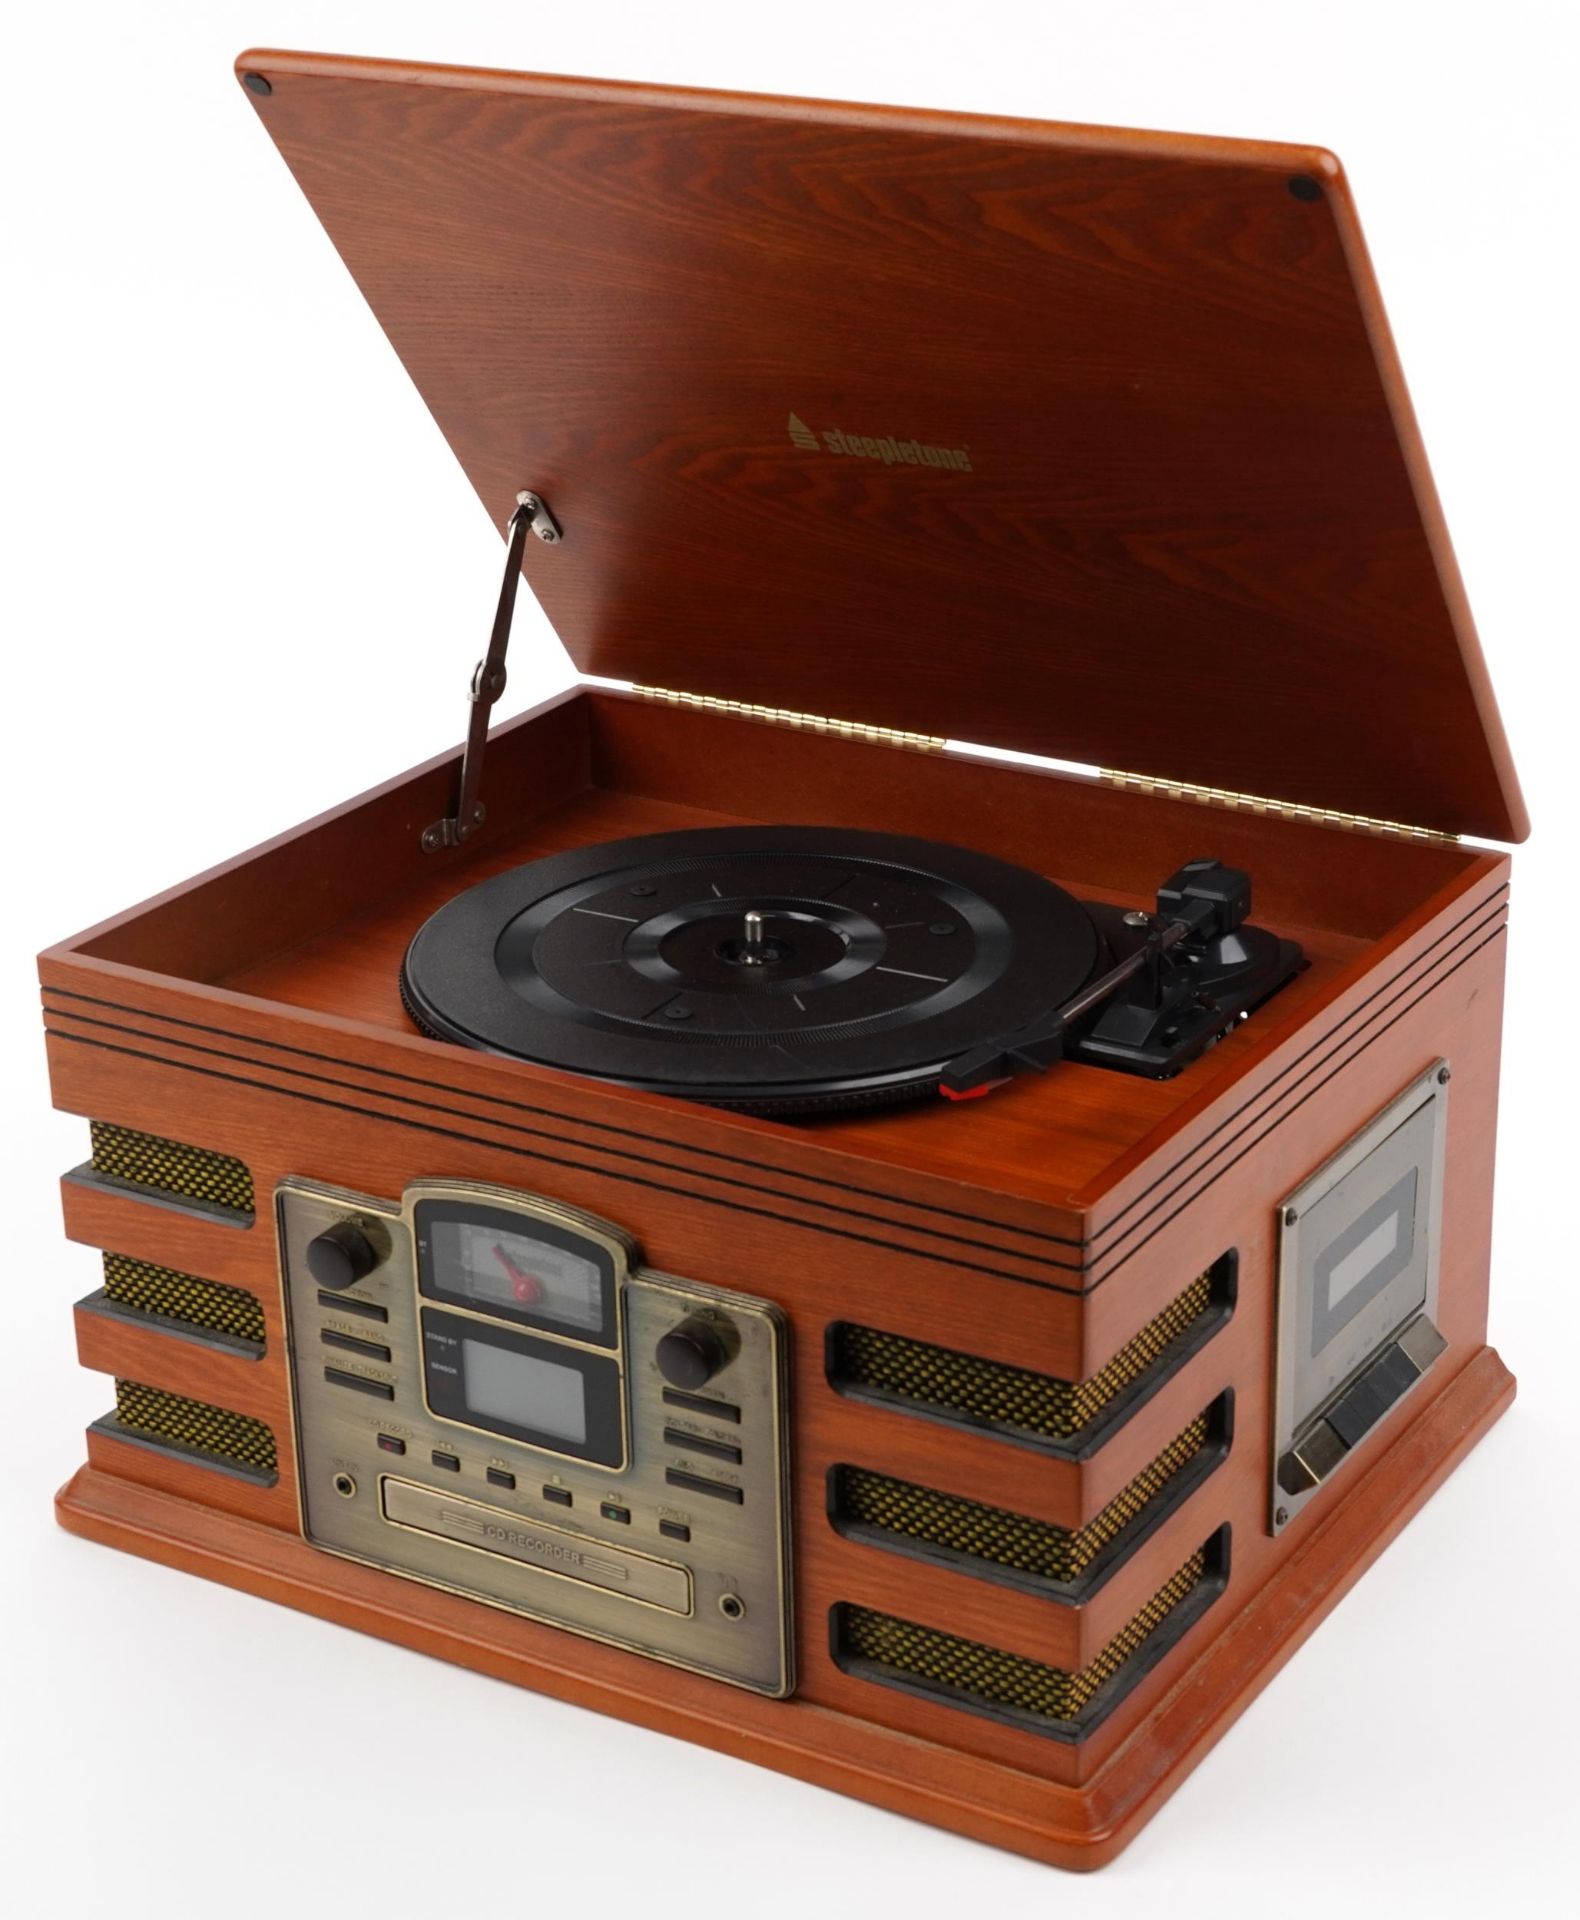 Retro Steepletone lightwood record/CD player and radio, 26cm H x 45cm W x 37cm D : For further